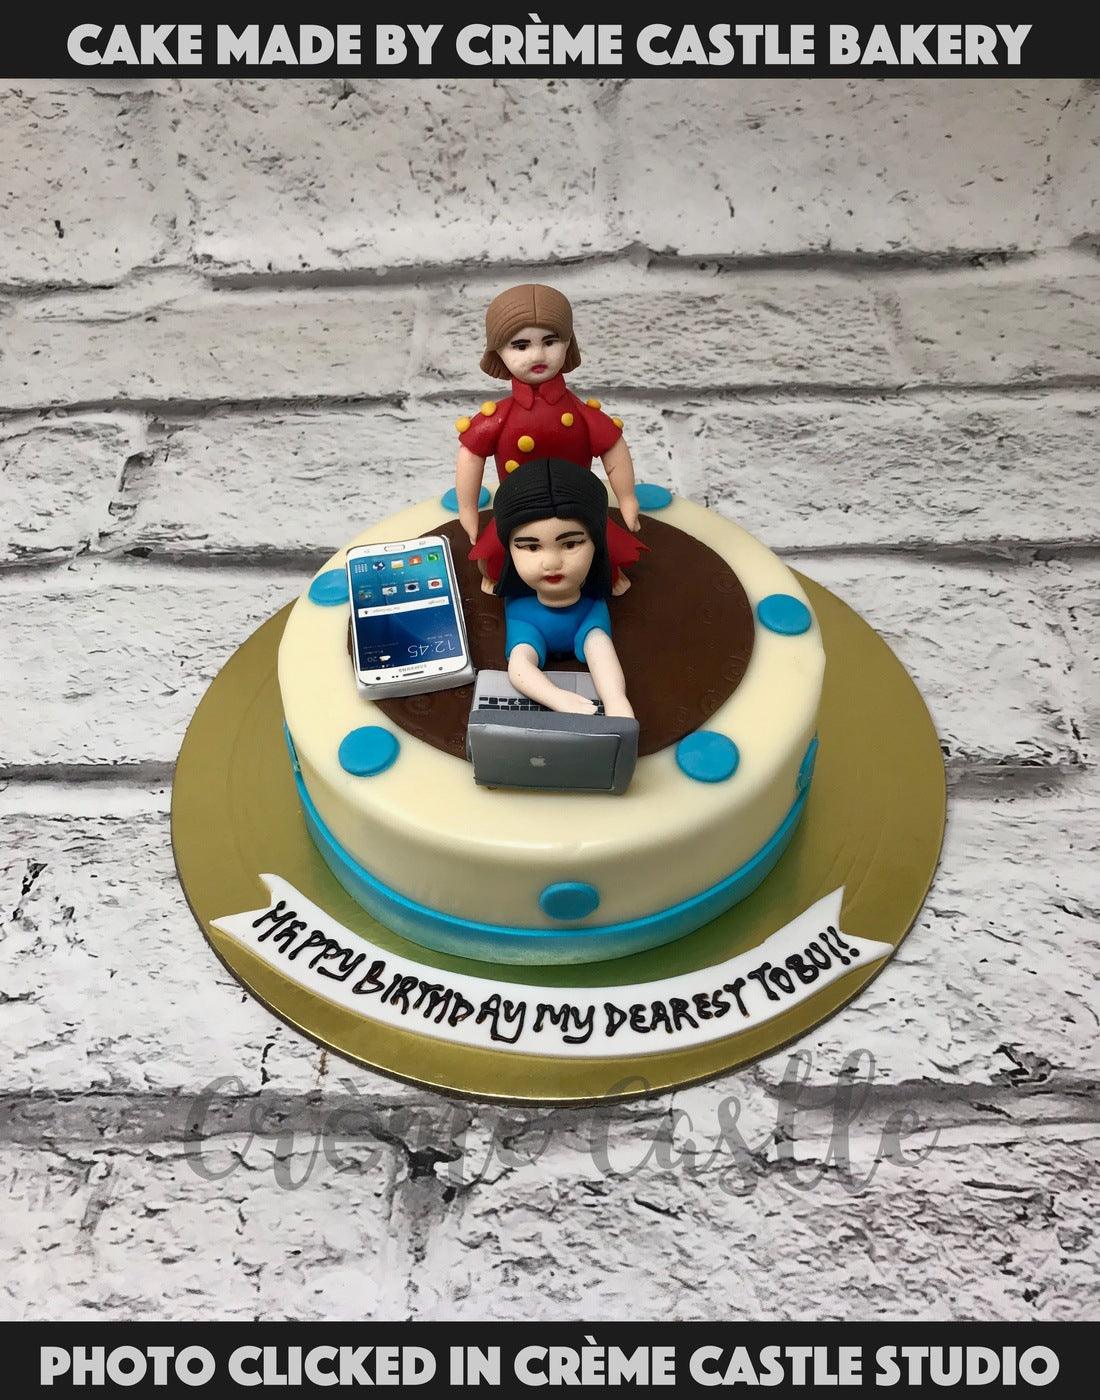 Mom and Daughter Theme Cake by Creme Castle